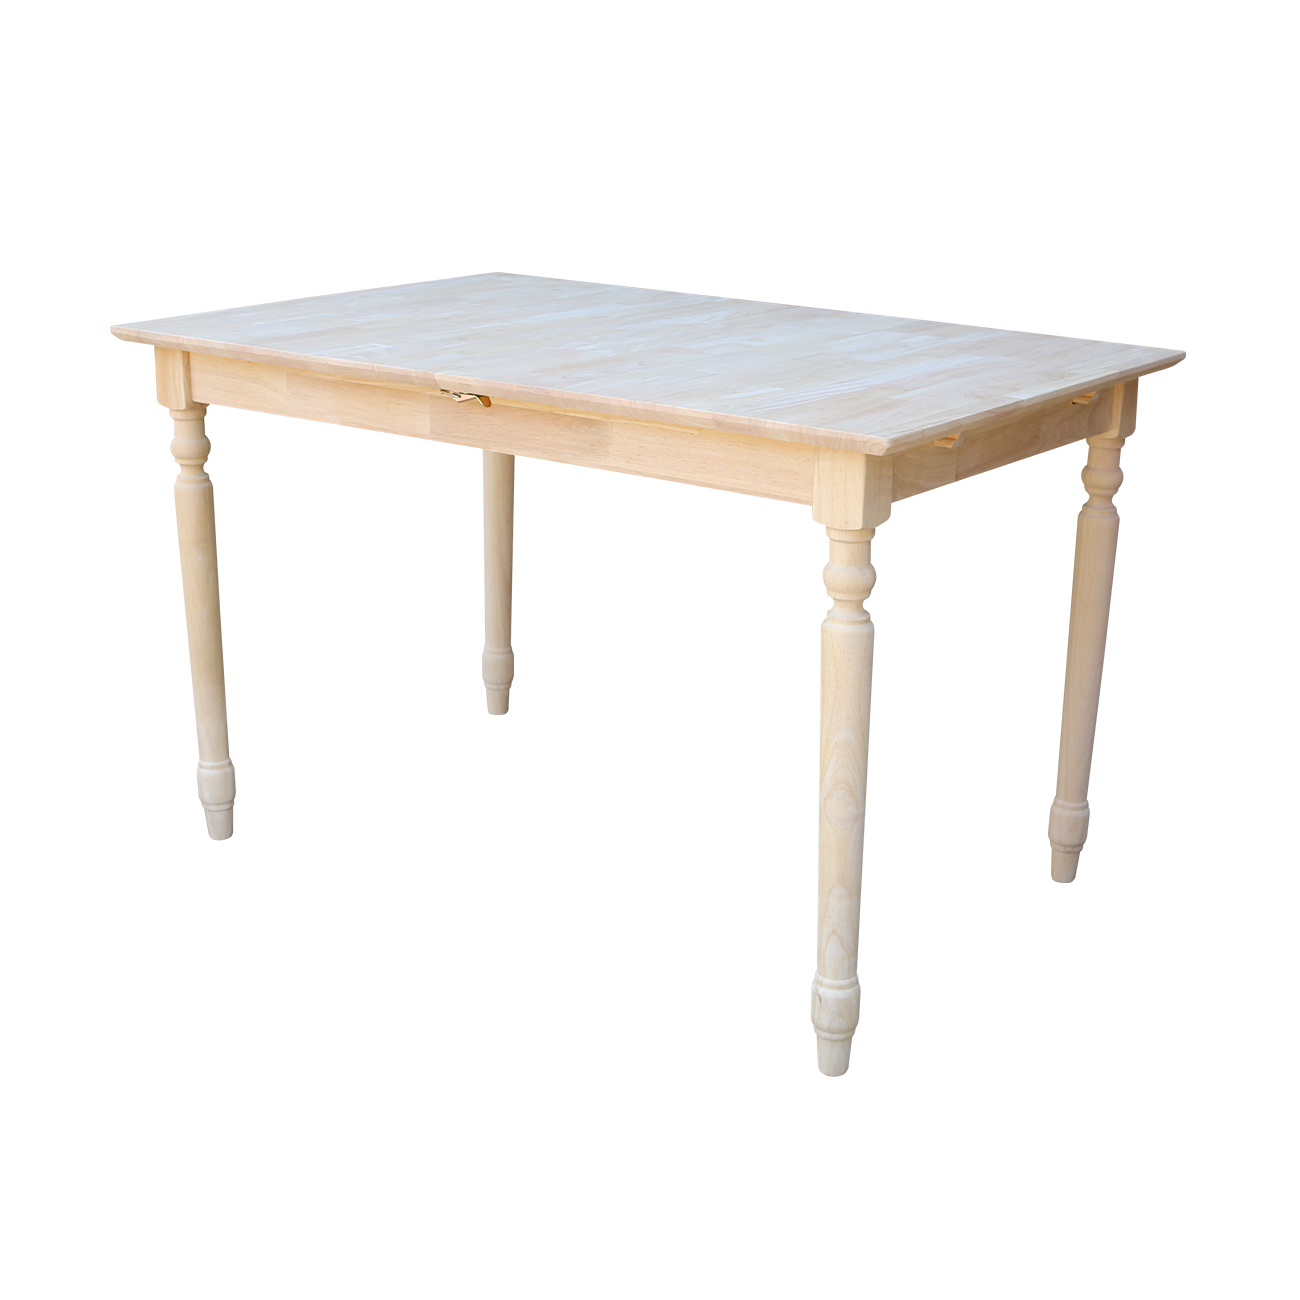 Whitewood  Table with butterfly extension